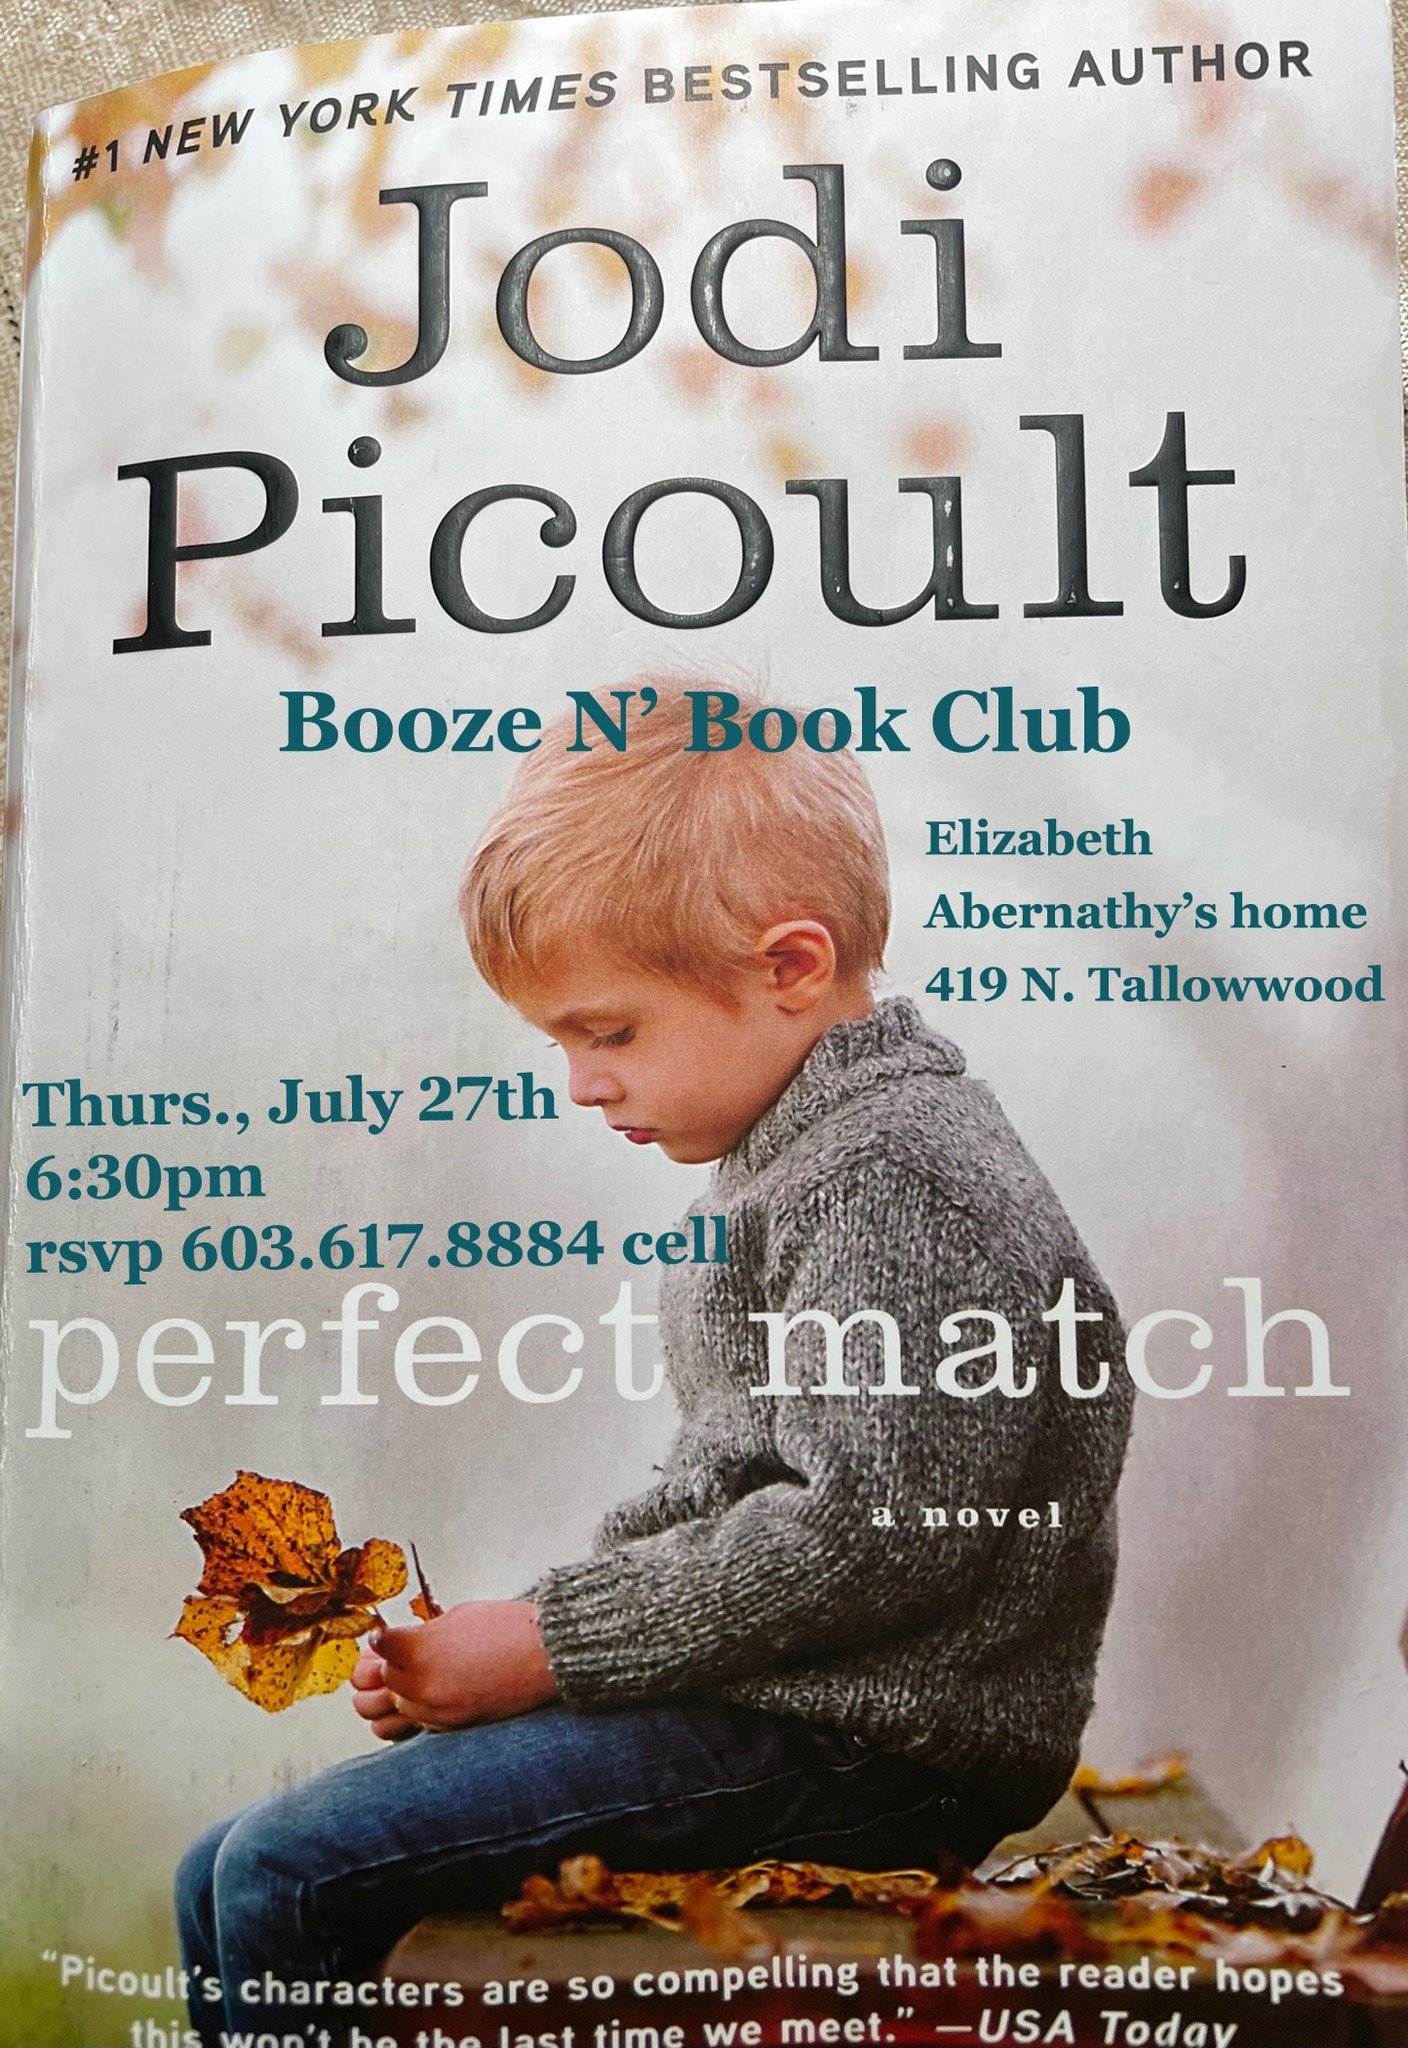 May be an image of 1 person and text that says '#1 NEW YORK TIMES BESTSELLING AUTHOR Jodi Picoult Booze Ν' Book Club Elizabeth Abernathy's home 419 Ν. Tallowwood Thurs., July 27th 6:30pm rsvp 603 603.617.8884 8884 cell perfect match anovel a' novel "Picoult's characters are so compelling that the reader hopes -USA Today'